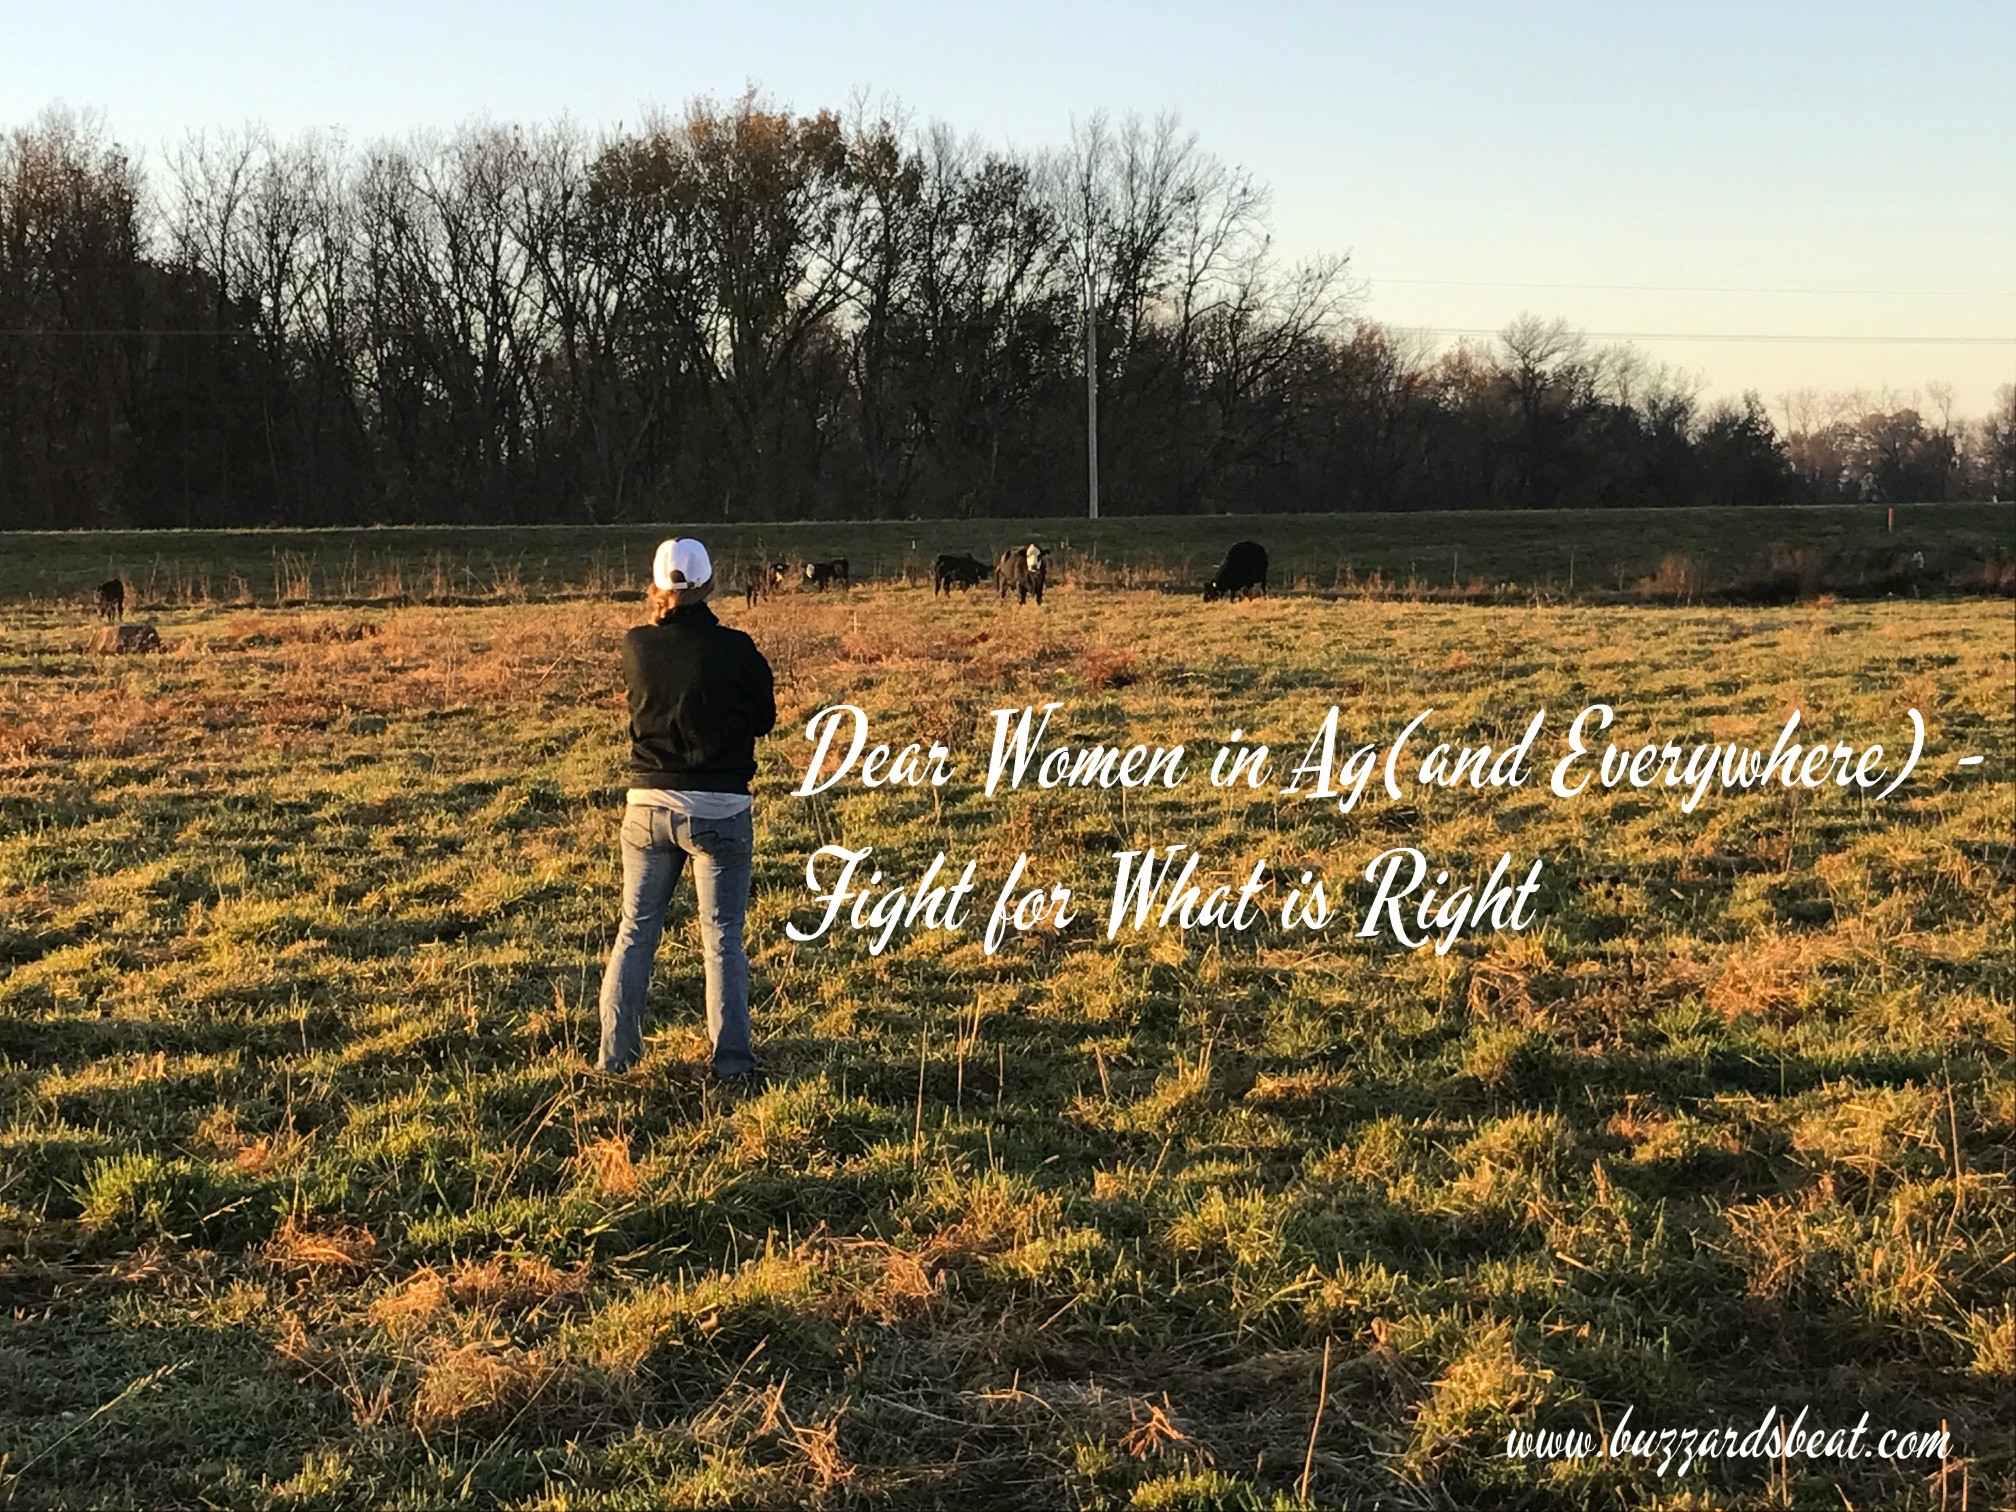 Dear Women in Ag (and Everywhere) – Follow Hillary’s Advice and Fight For What is Right